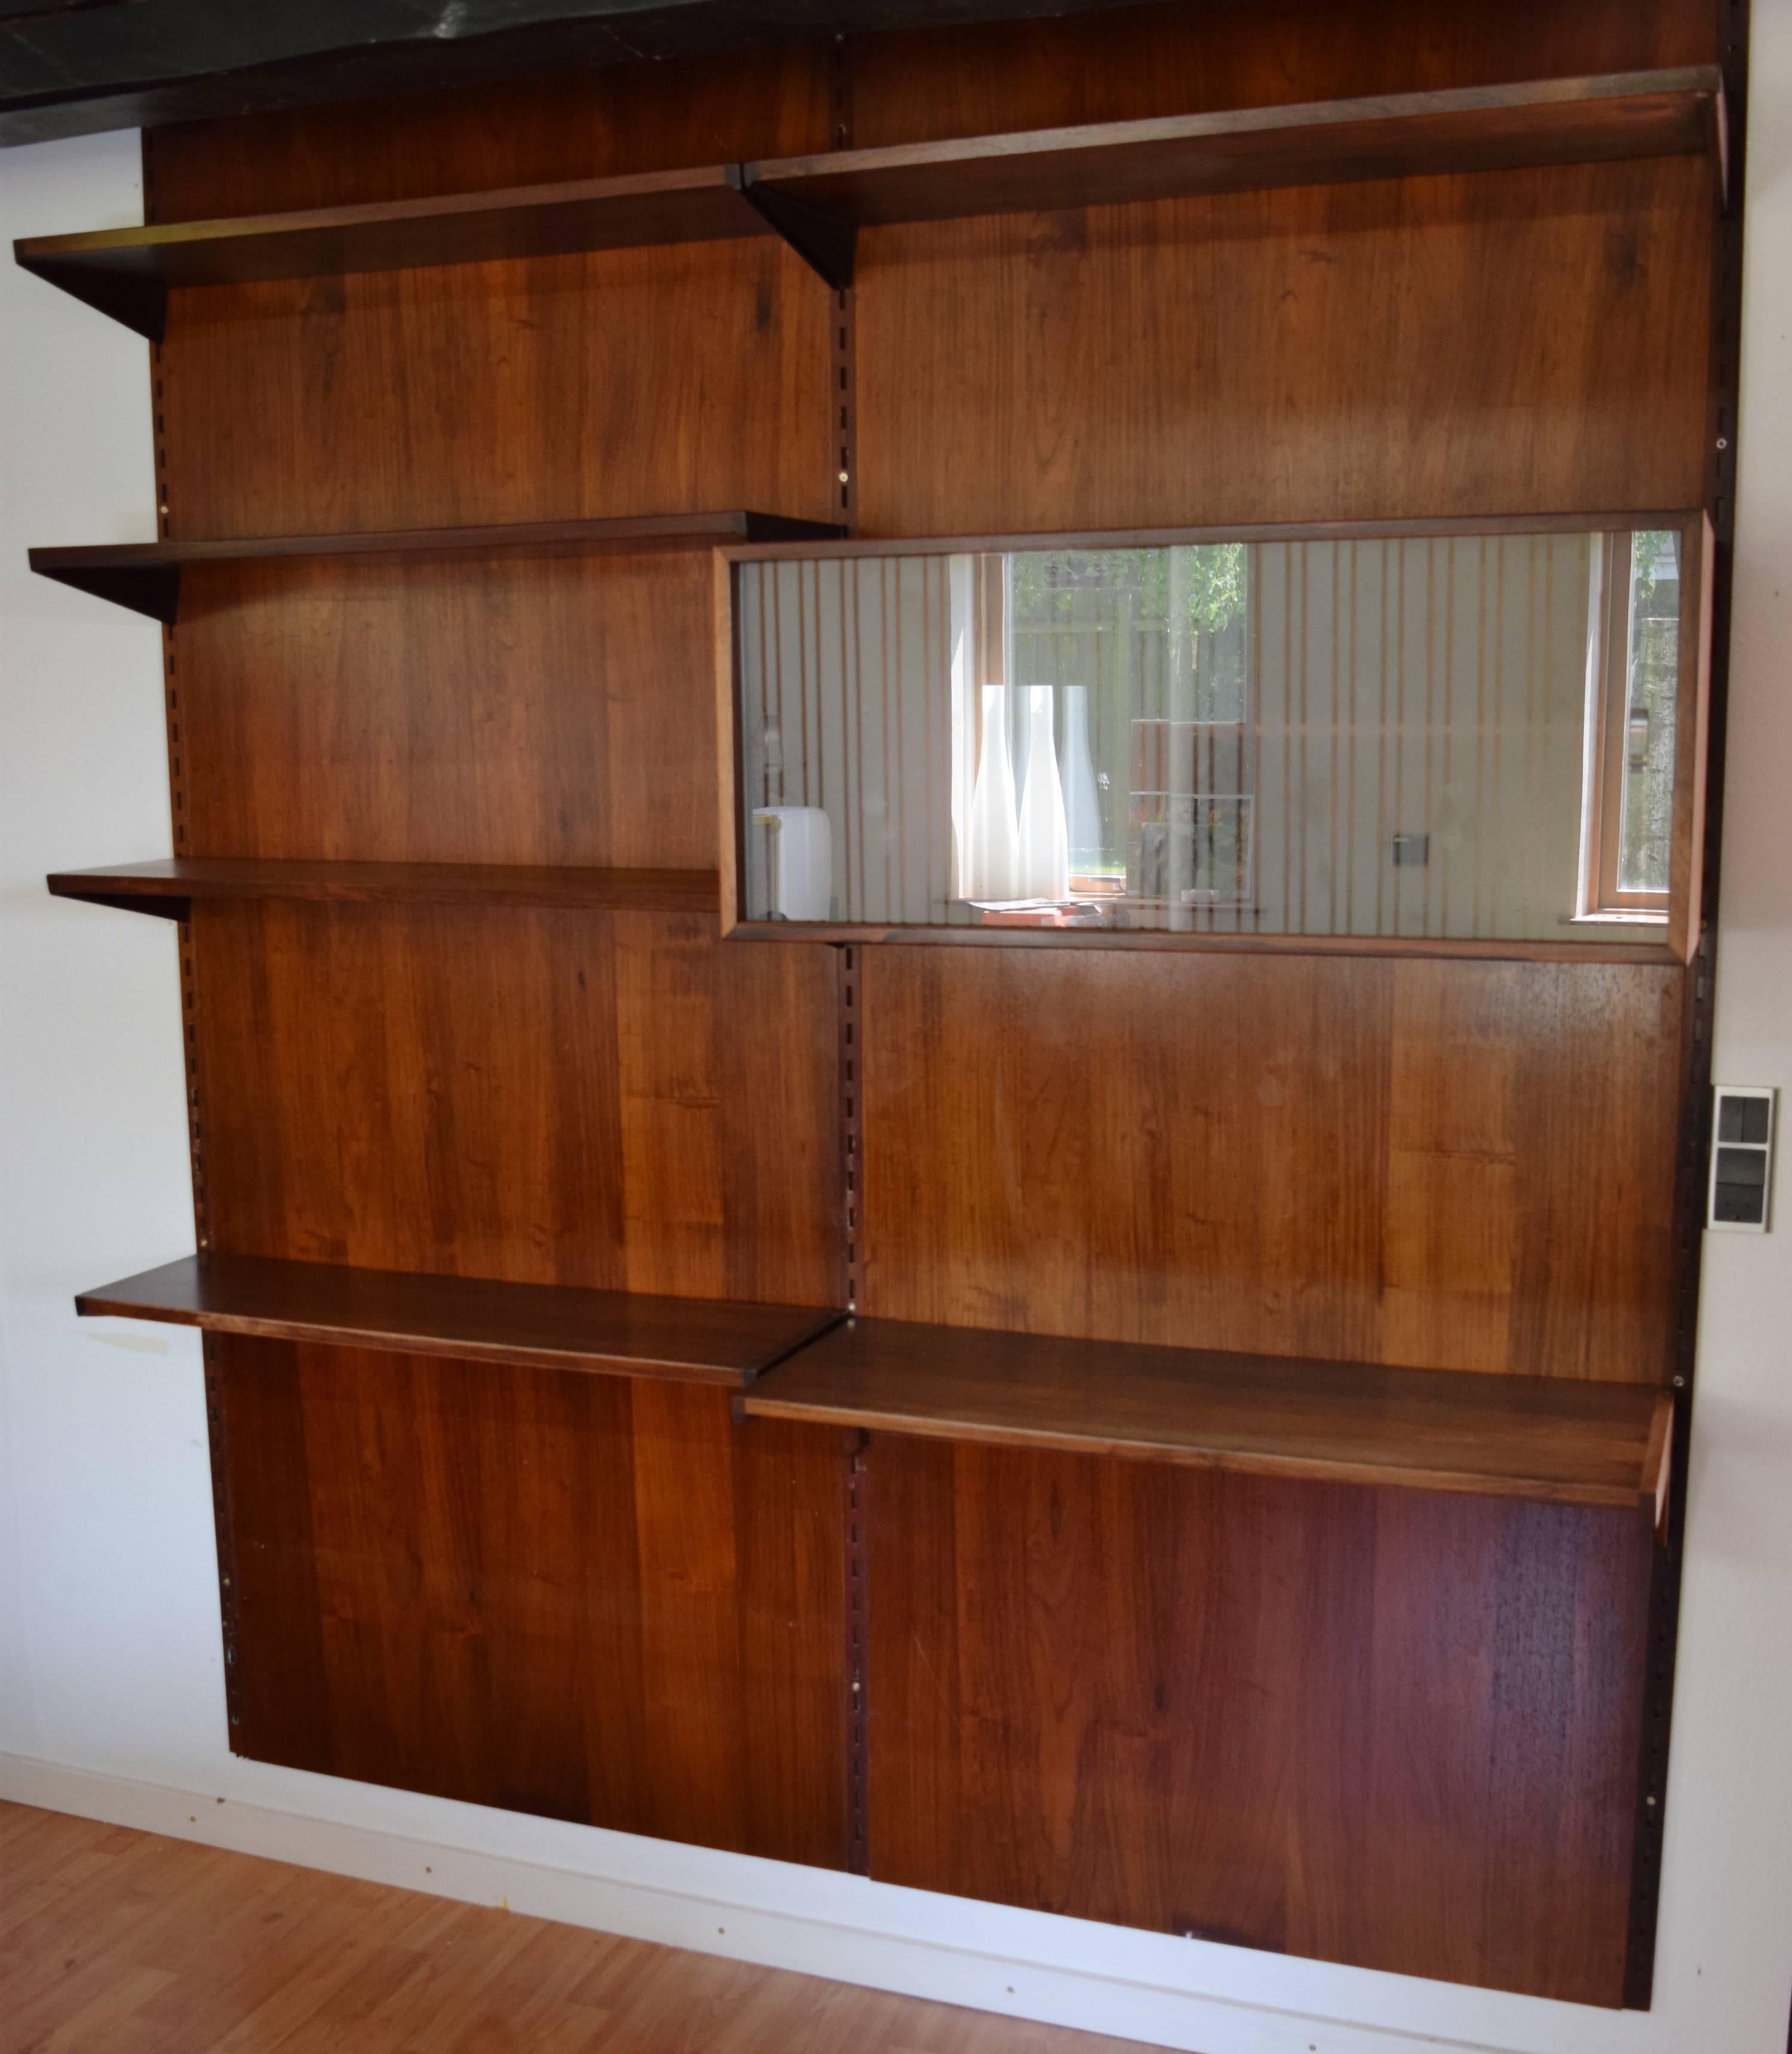 Rosewood wall system designed by Kai Kristiansen and manufactured by FM Møbler, Denmark from the 1960s. This system comprises of six height adjustable small shelves, a cabinet with glass sliding doors and three hanging rails. The rosewood